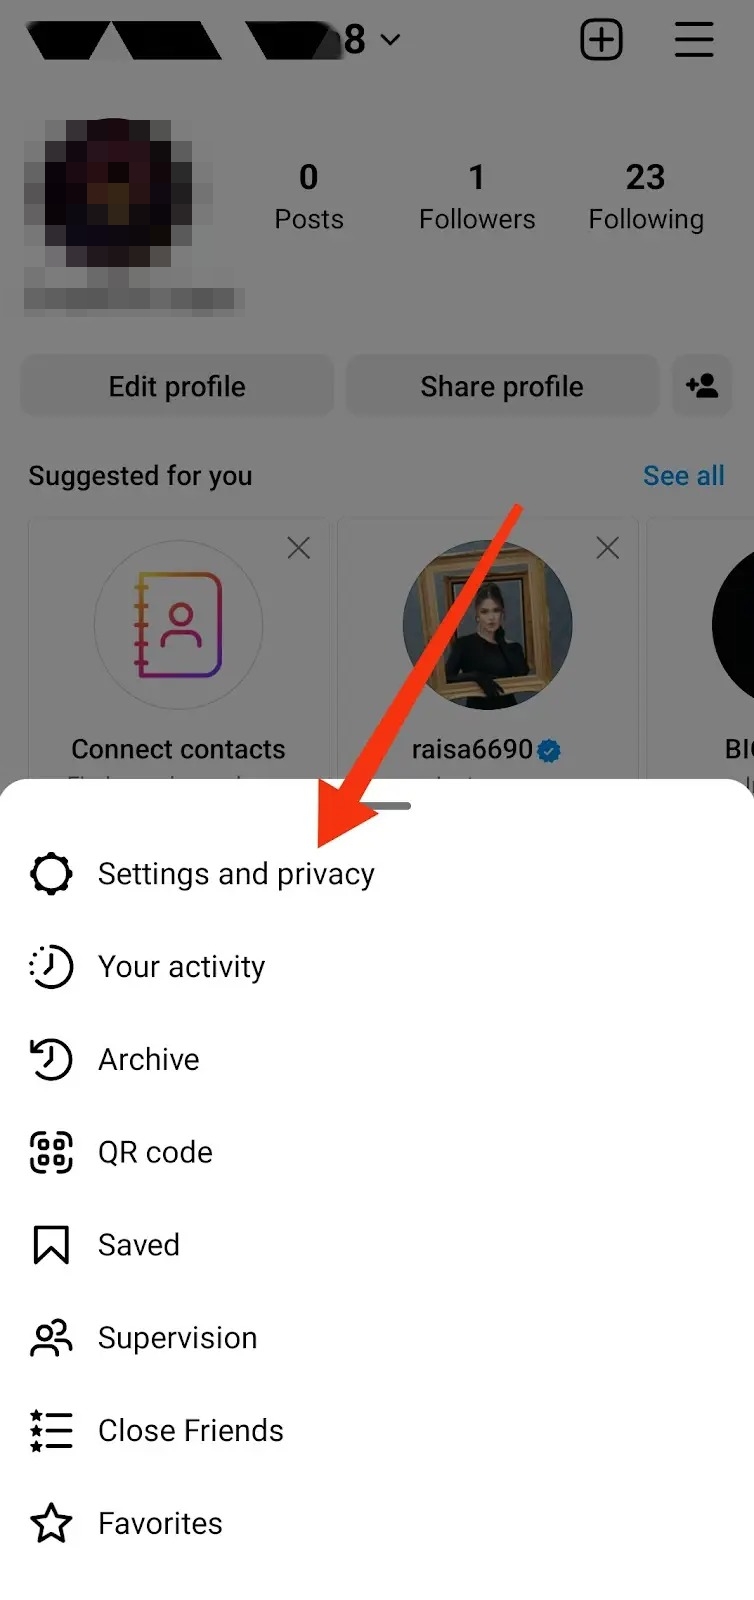 Open Instagram Settings and Privacy